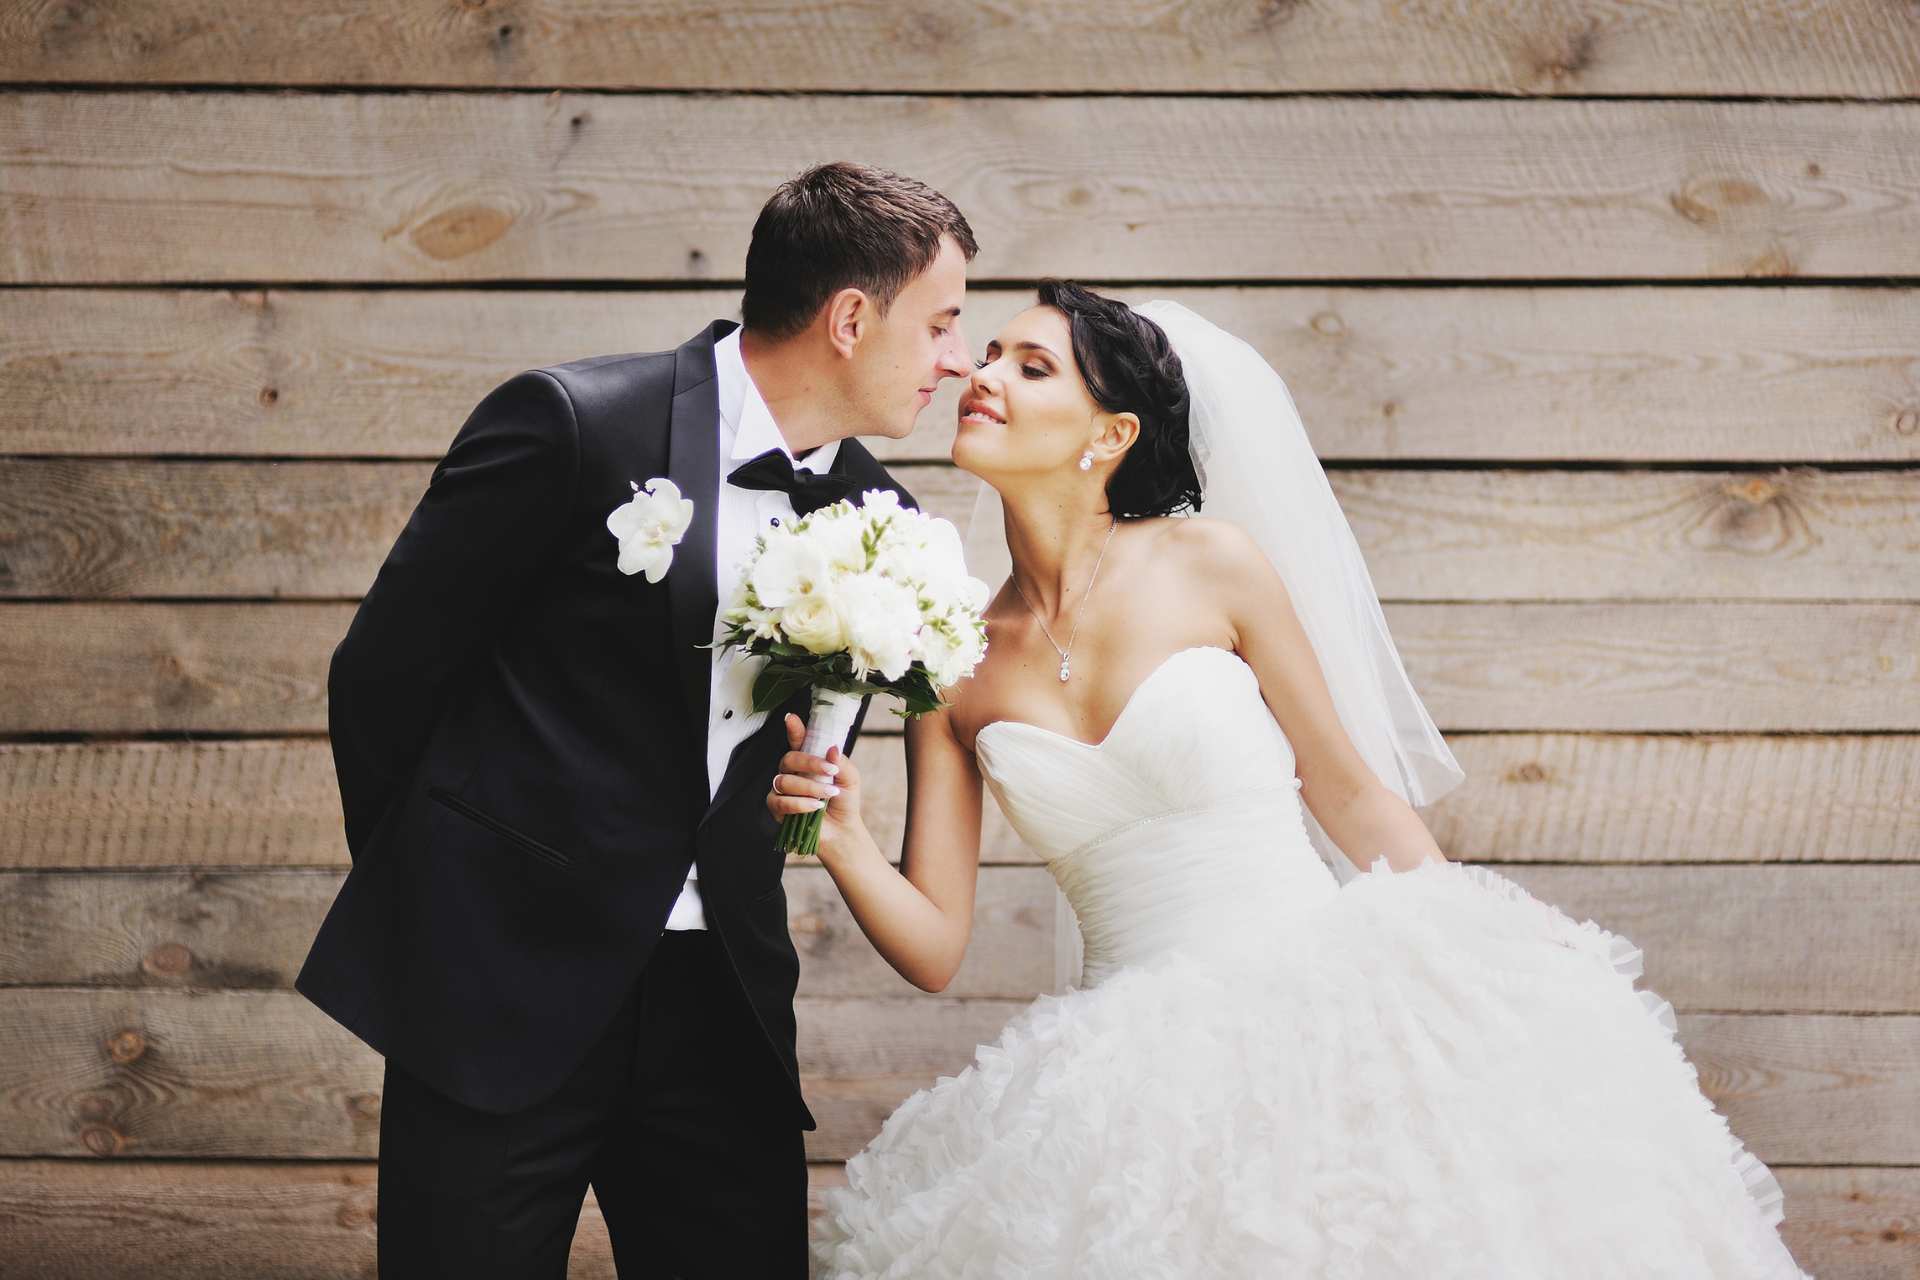 Budget-Friendly Wedding Planning Tips for Every Couple